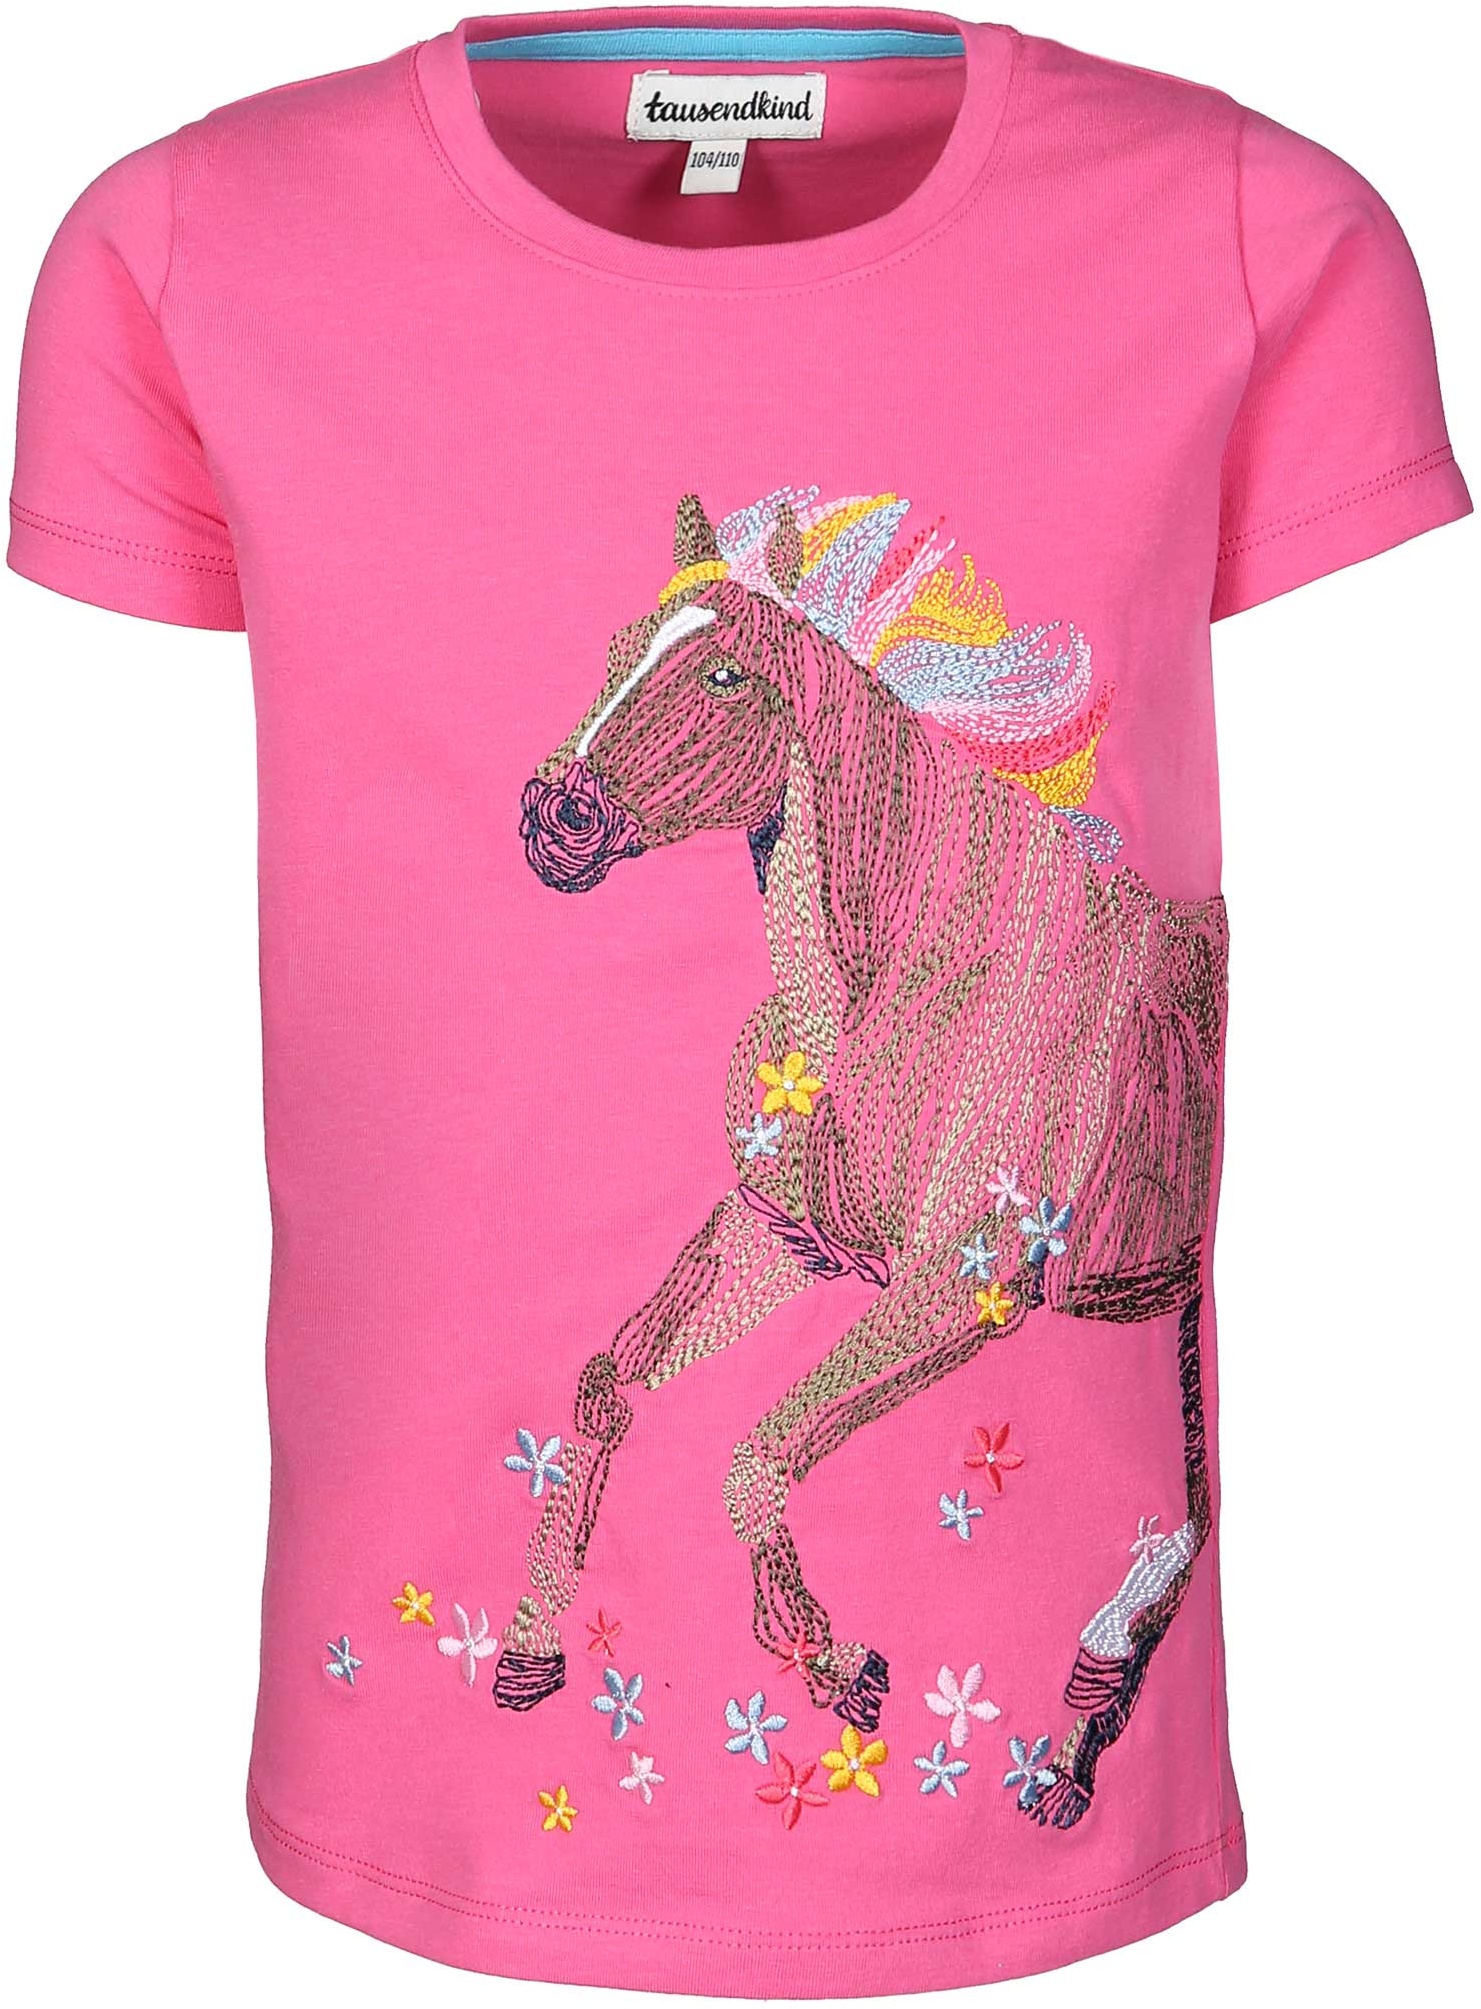 tausendkind collection - T-Shirt GALOPP in pink, Gr.152/158